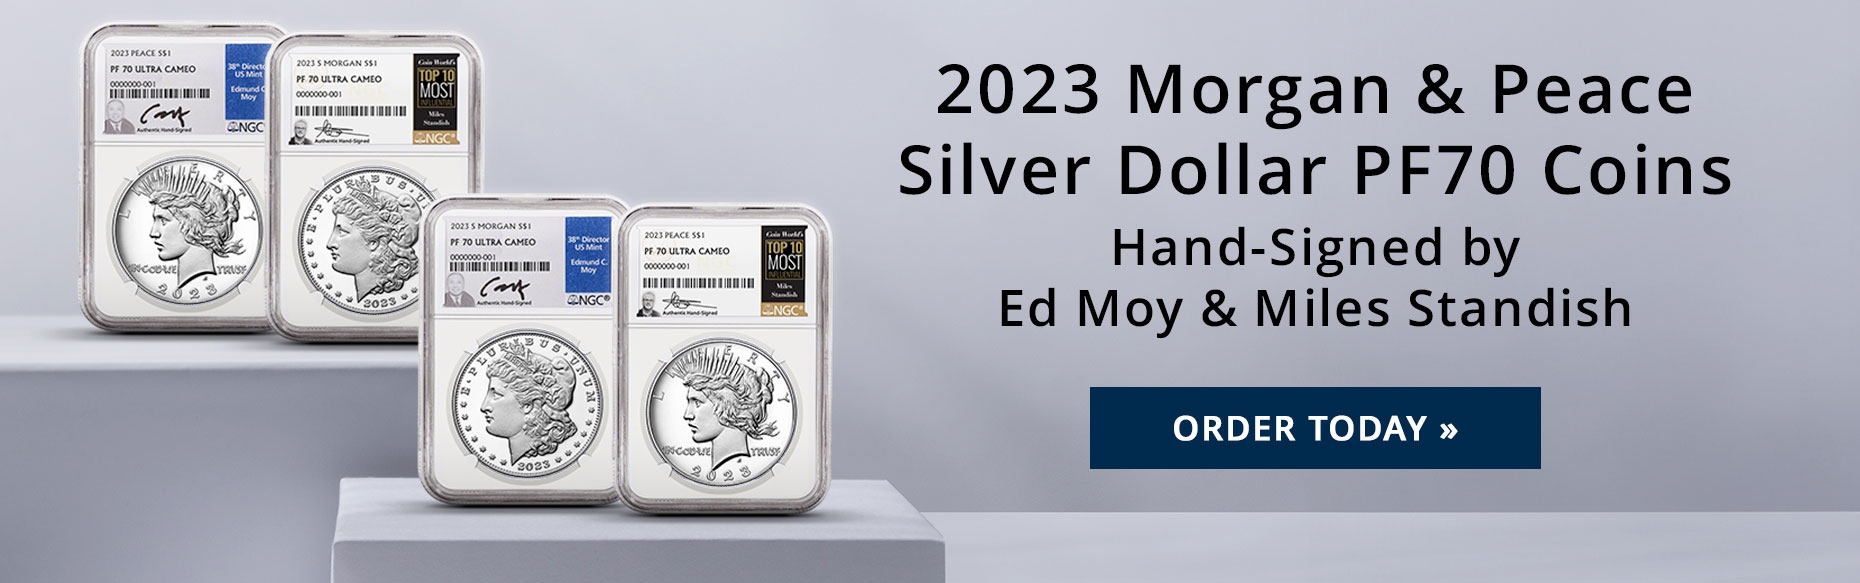 2023 Silver Morgan and Peace Dollars with labels hand-signed by Ed Moy and Miles Standish on a studio backdrop.